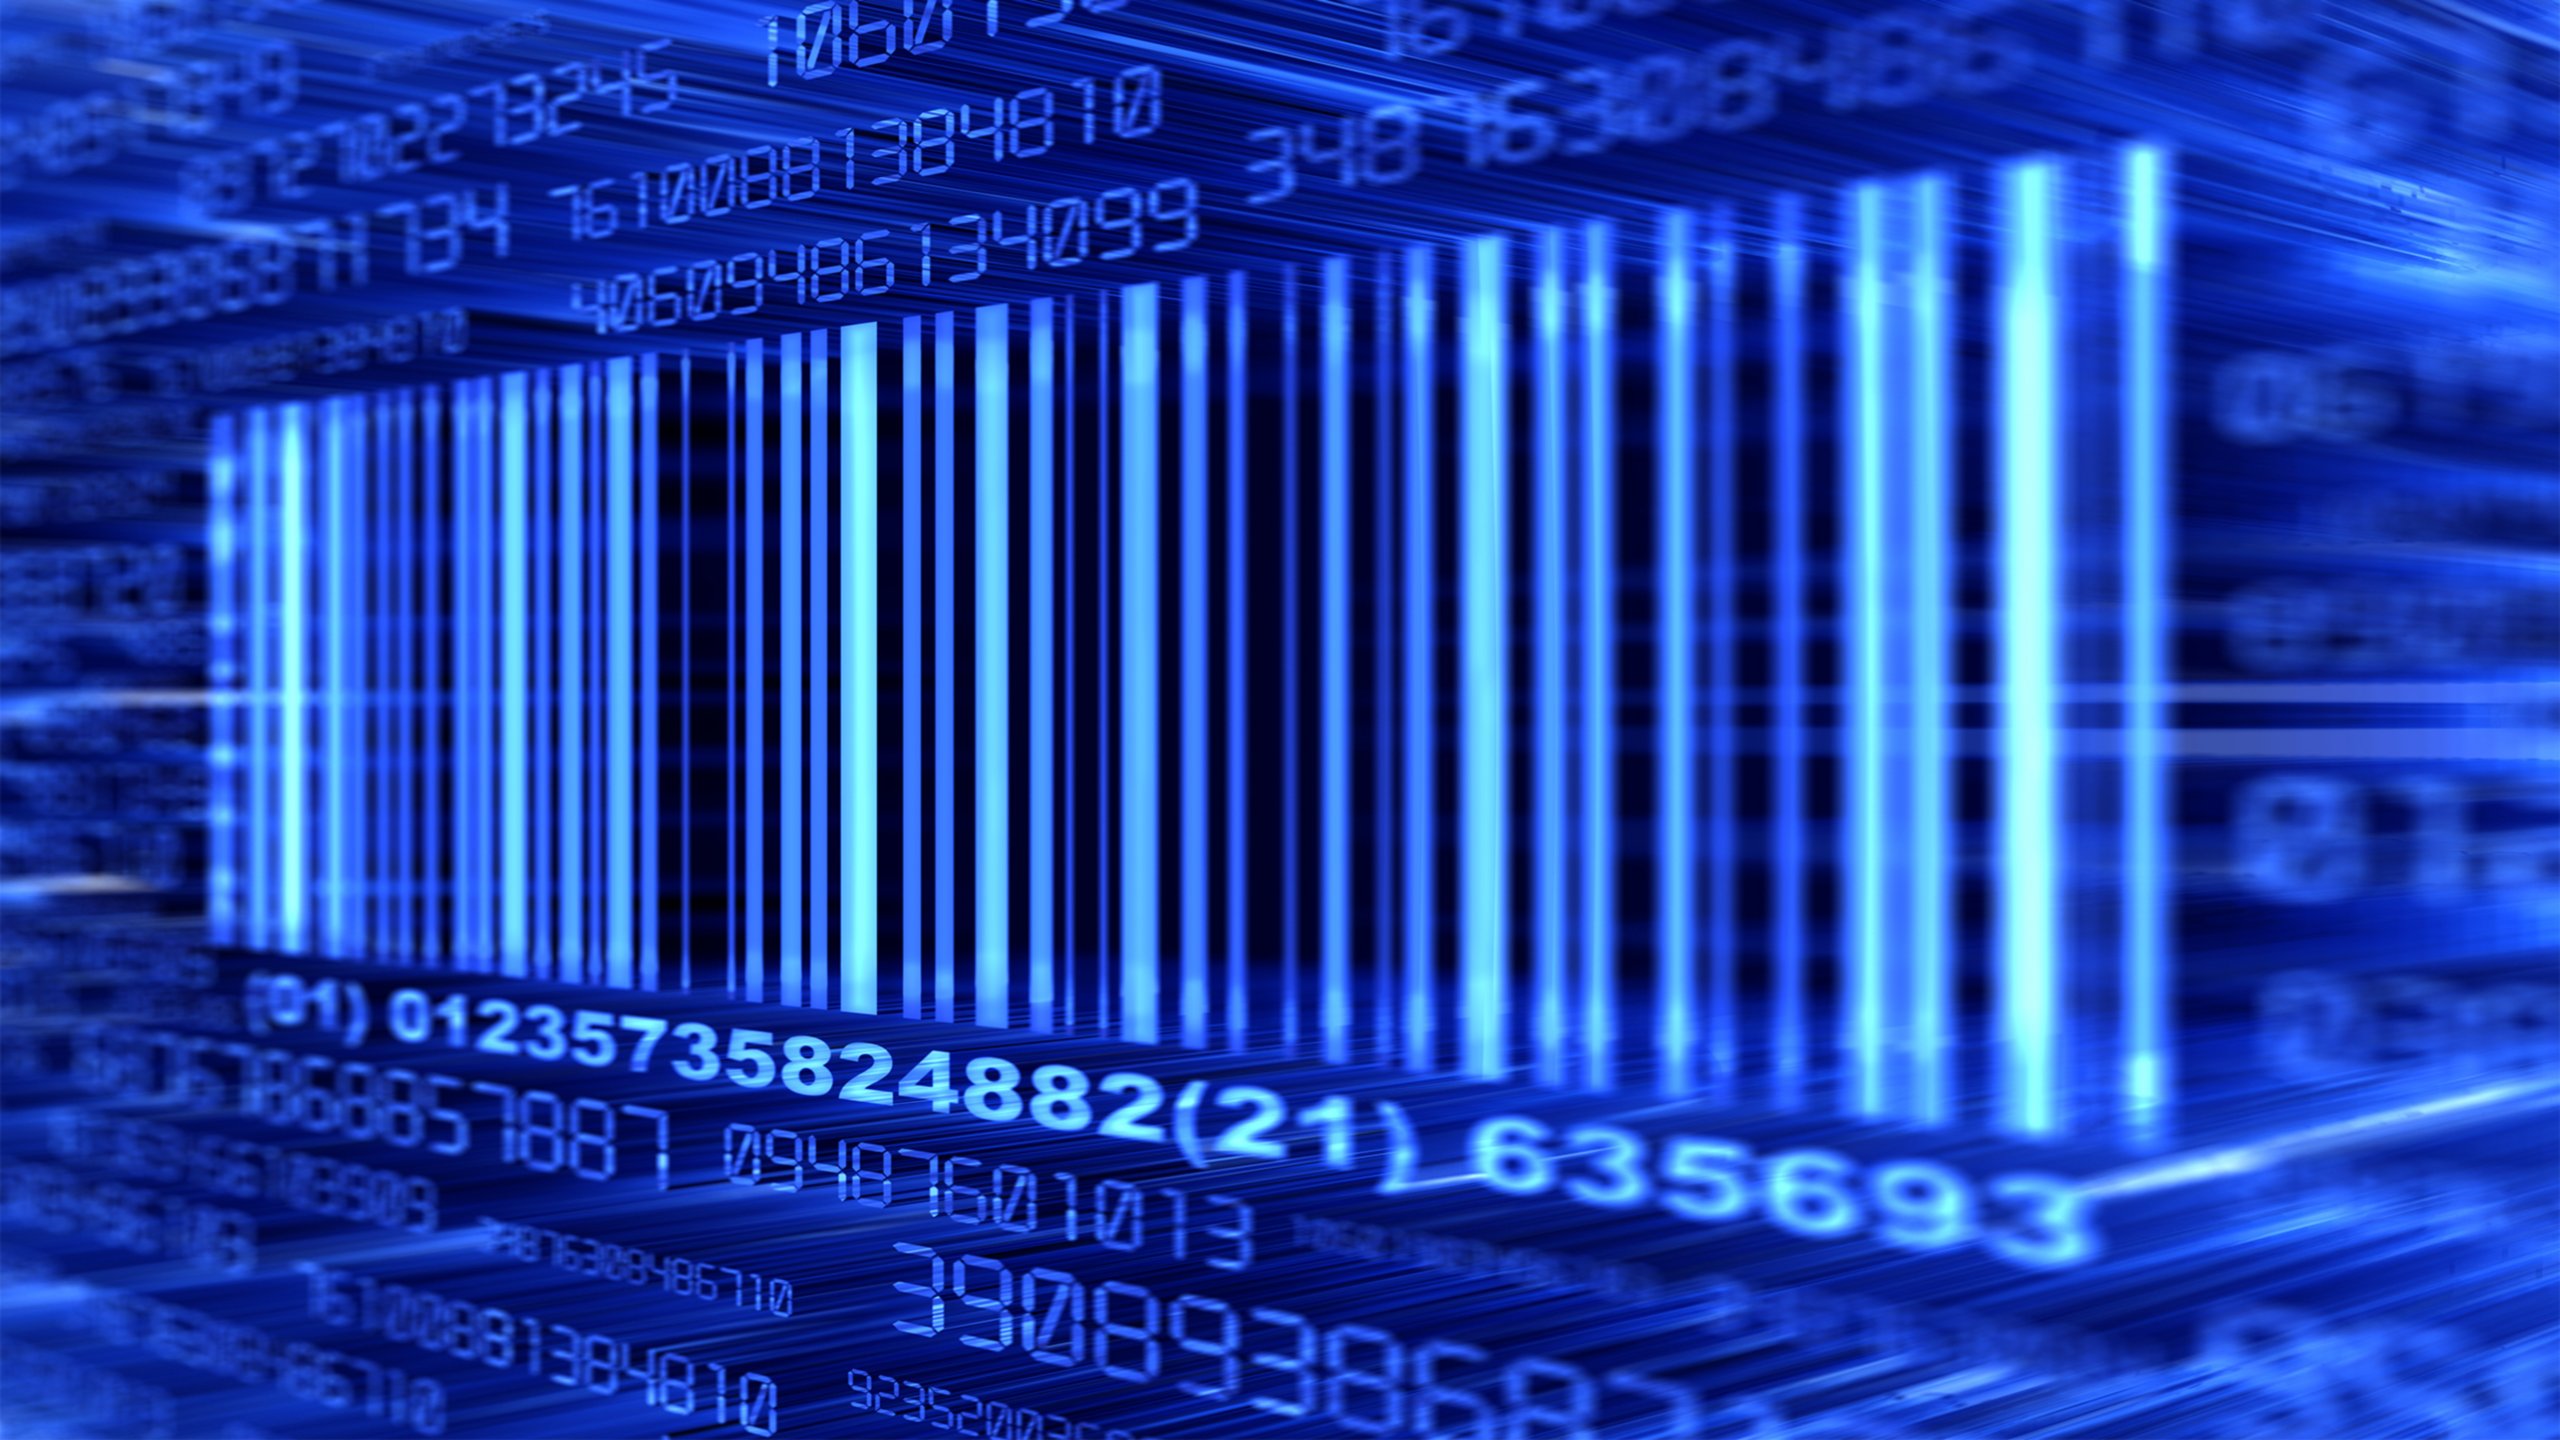 A blue barcode on a blue background